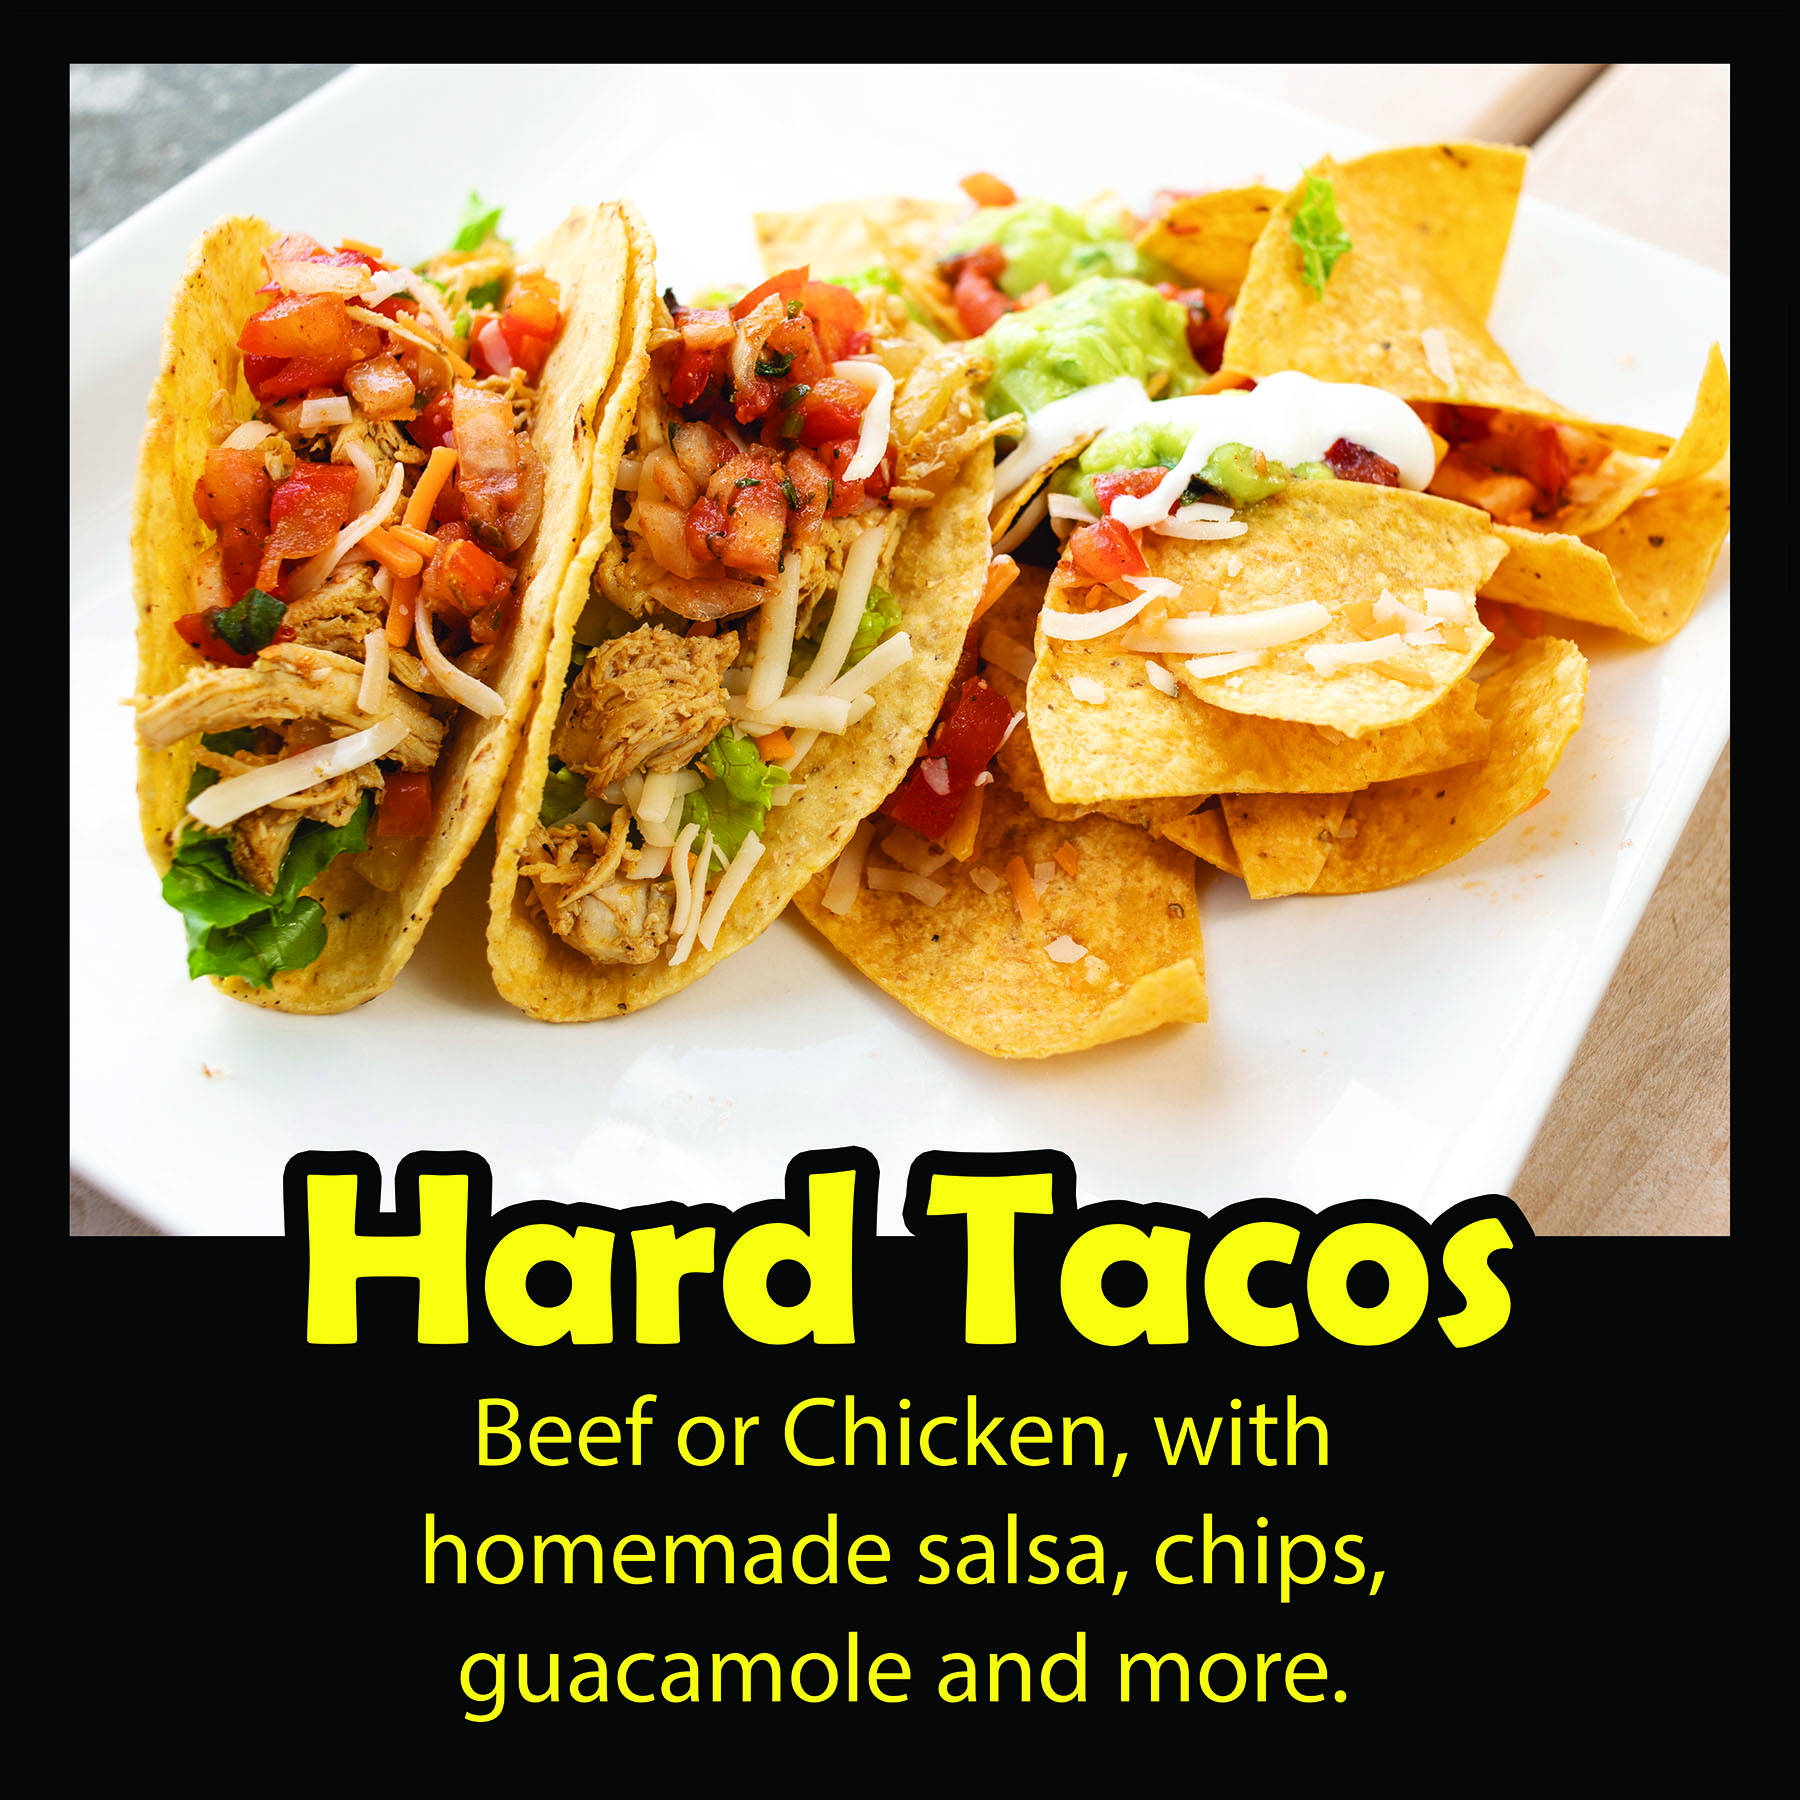 Hard Tacos: Beef or chickent with homemade salsa, chips, guacamole and more.